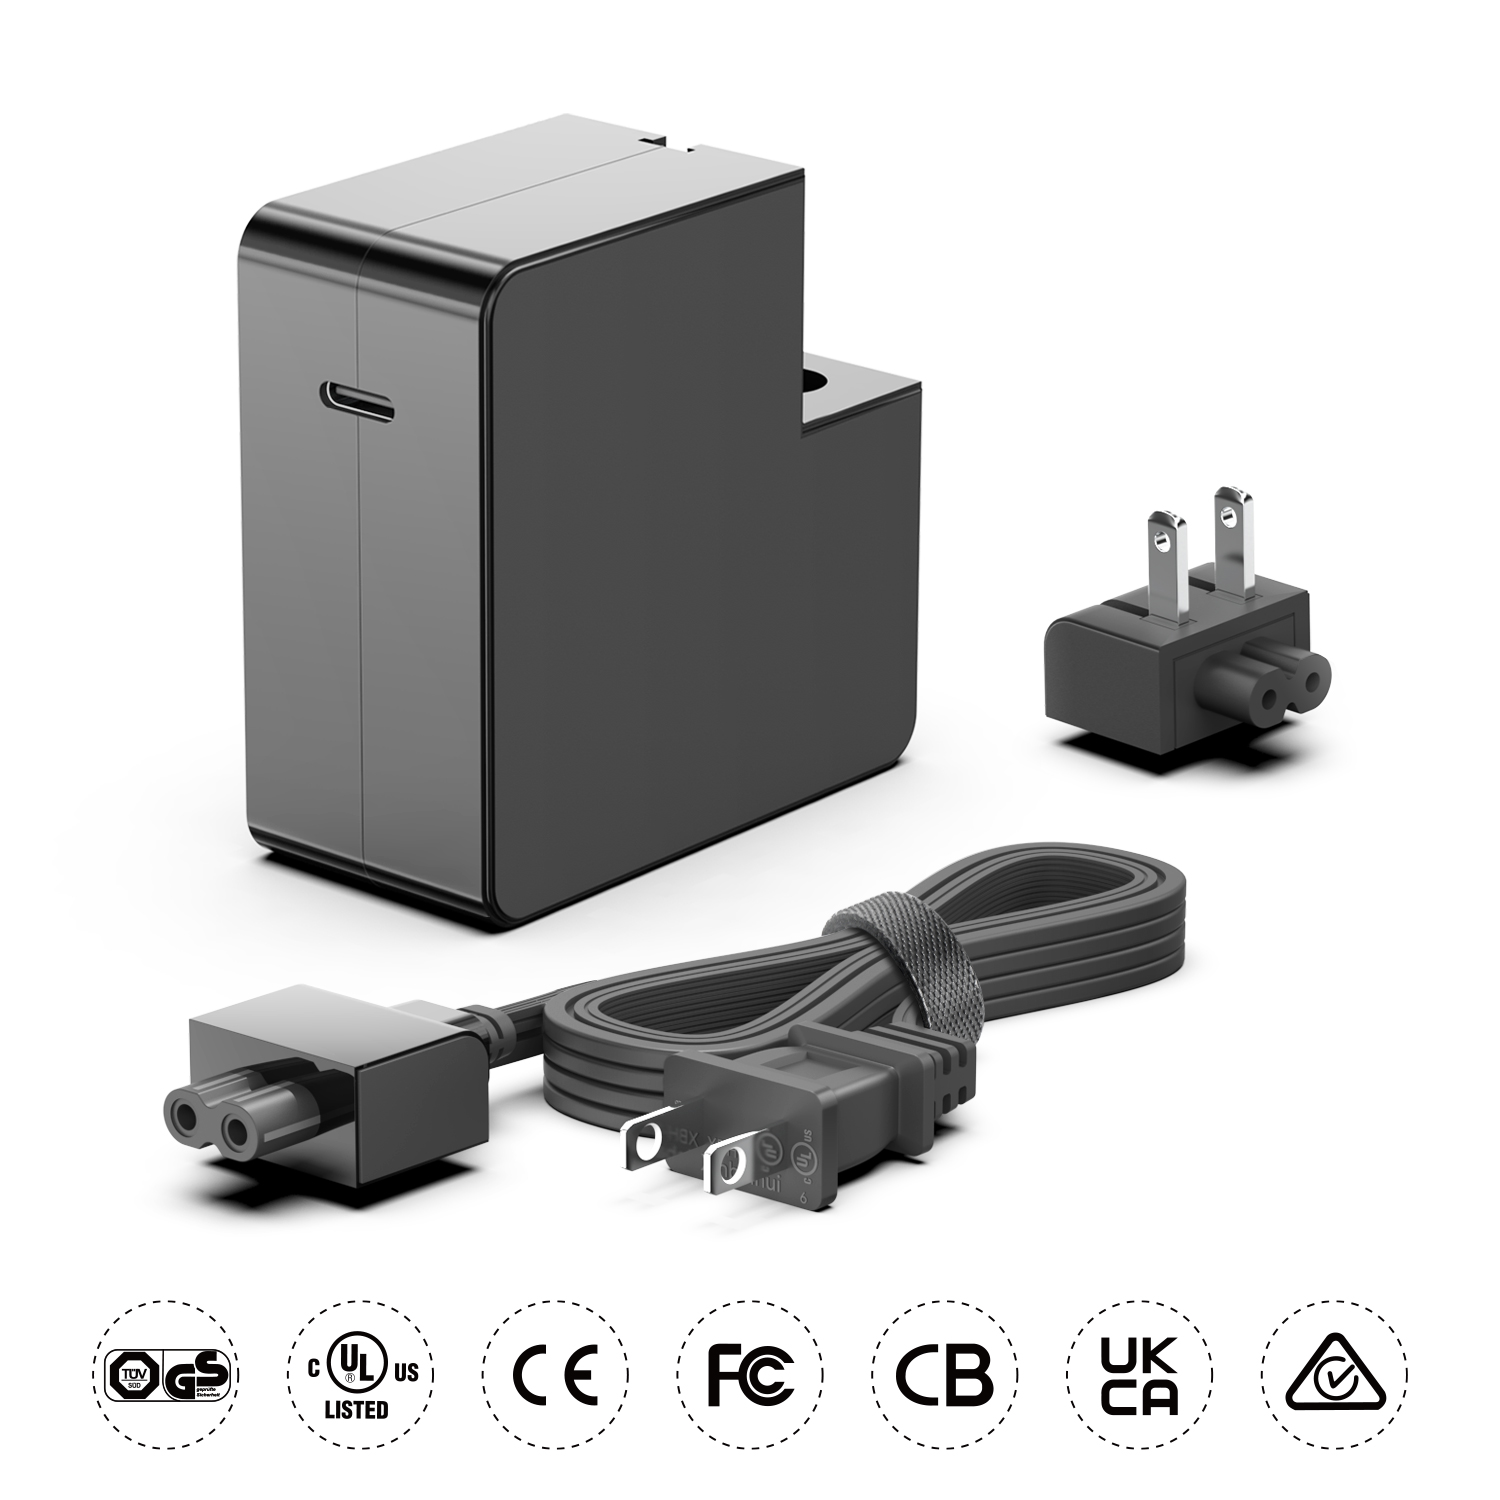 Detachable 100W USB C PD Power Adapter with Interchangeabl Plugs